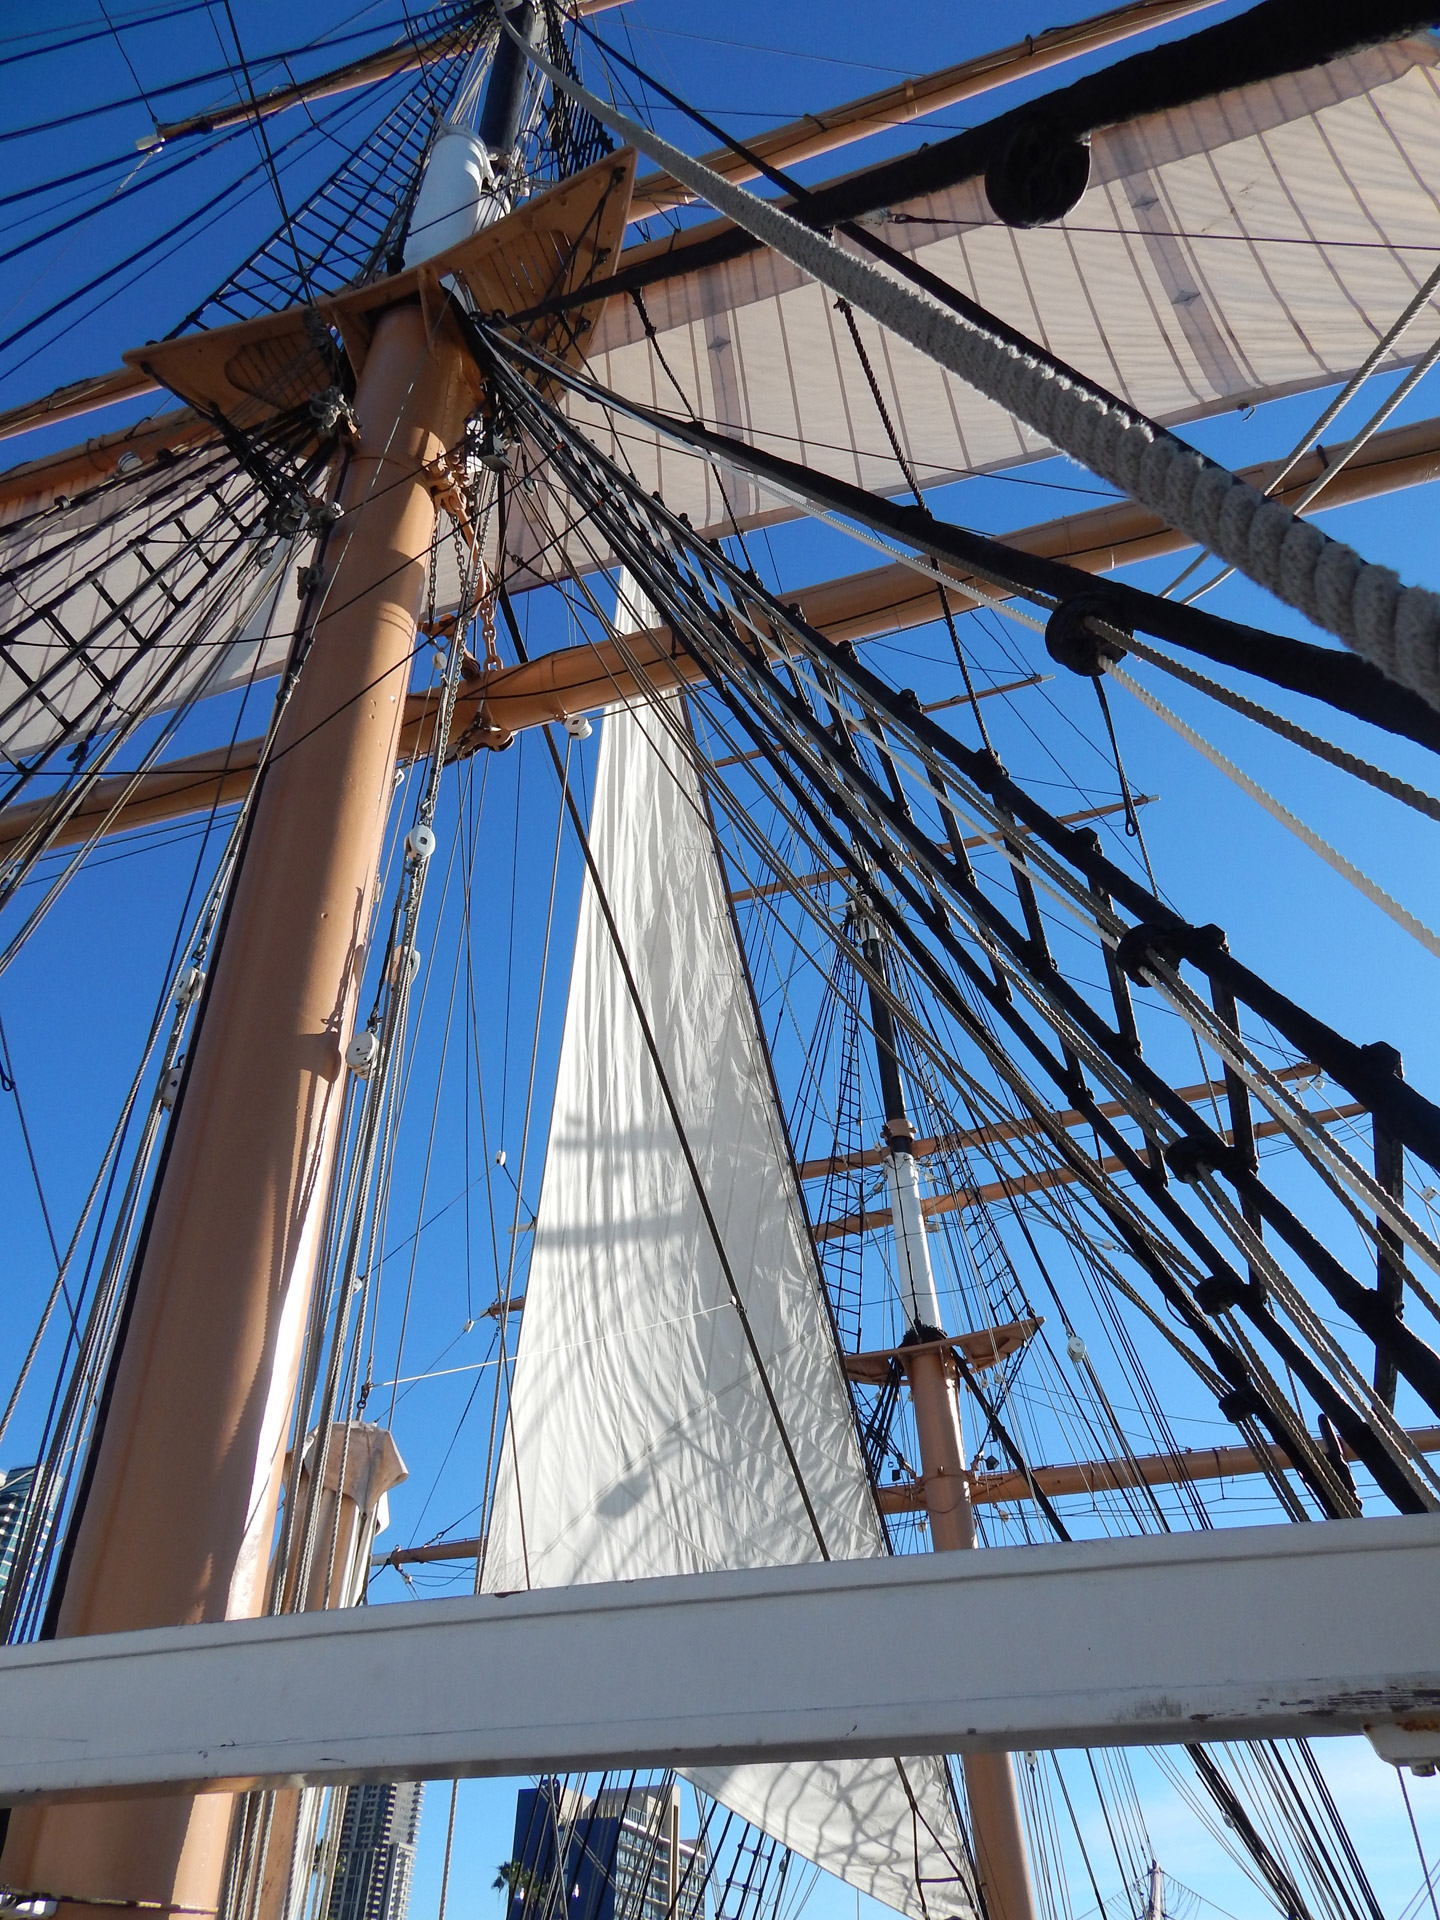 Star Of India Rigging And Sails